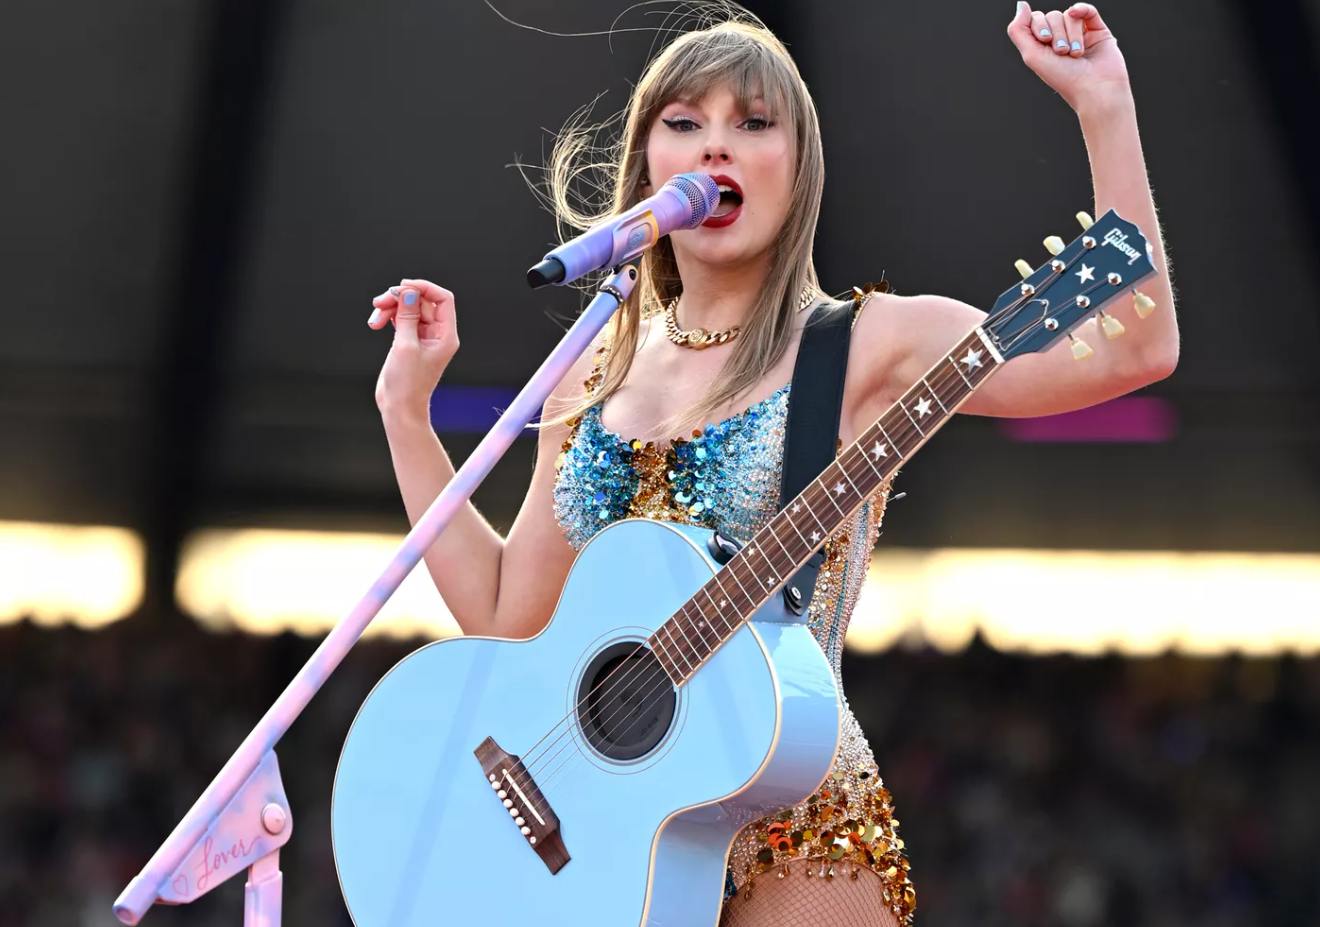 Taylor Swift pauses performance to help distressed fan: ‘I can do this all night’